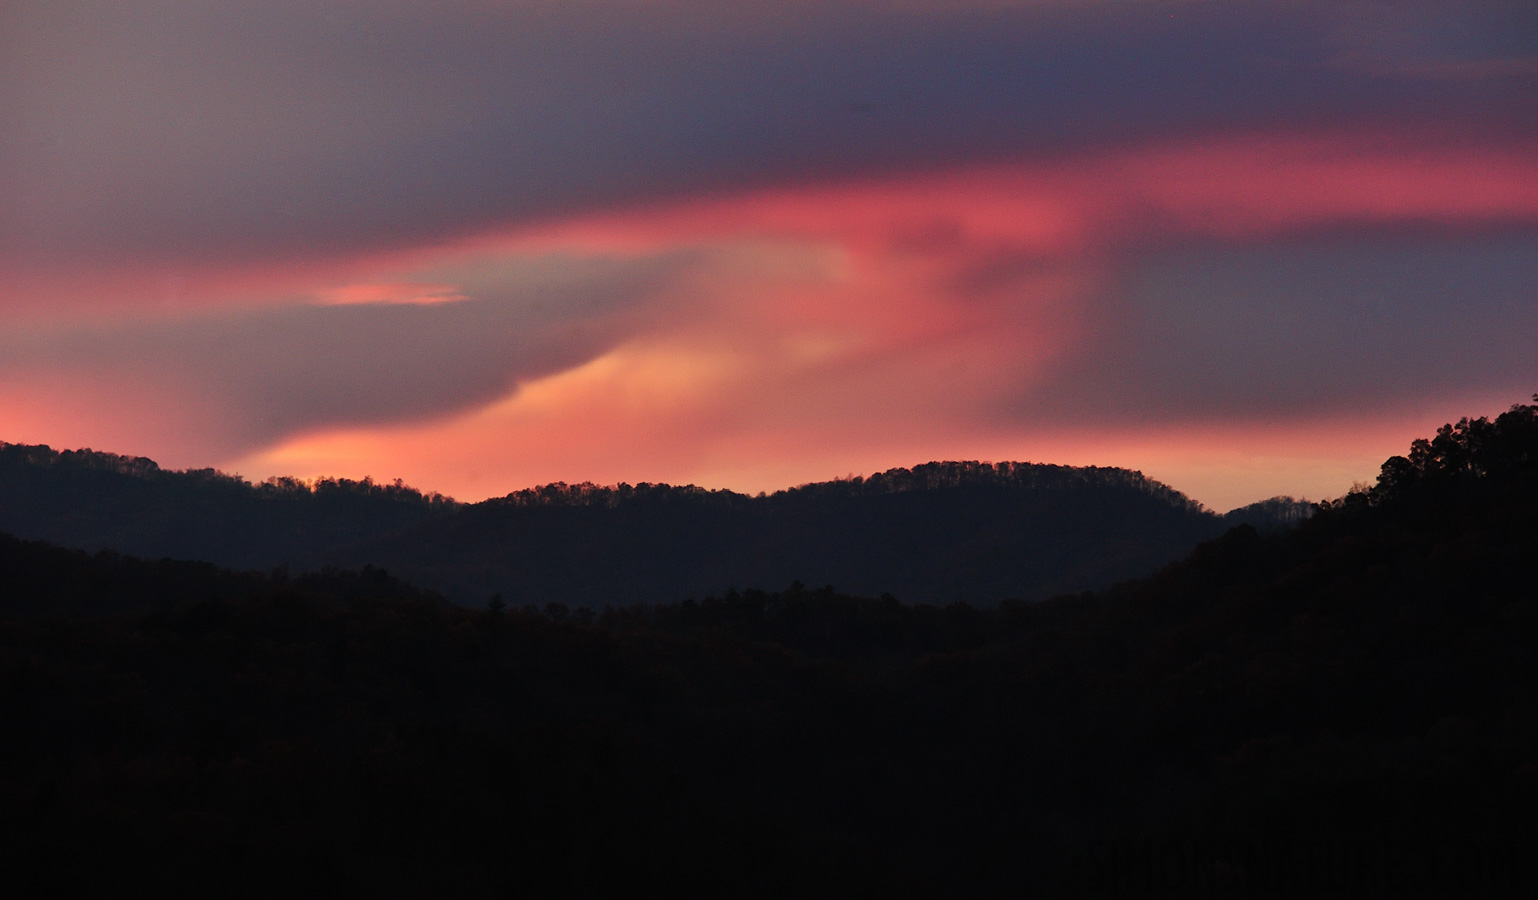 Appalachian Mountains [190 mm, 1/60 sec at f / 8.0, ISO 1600]